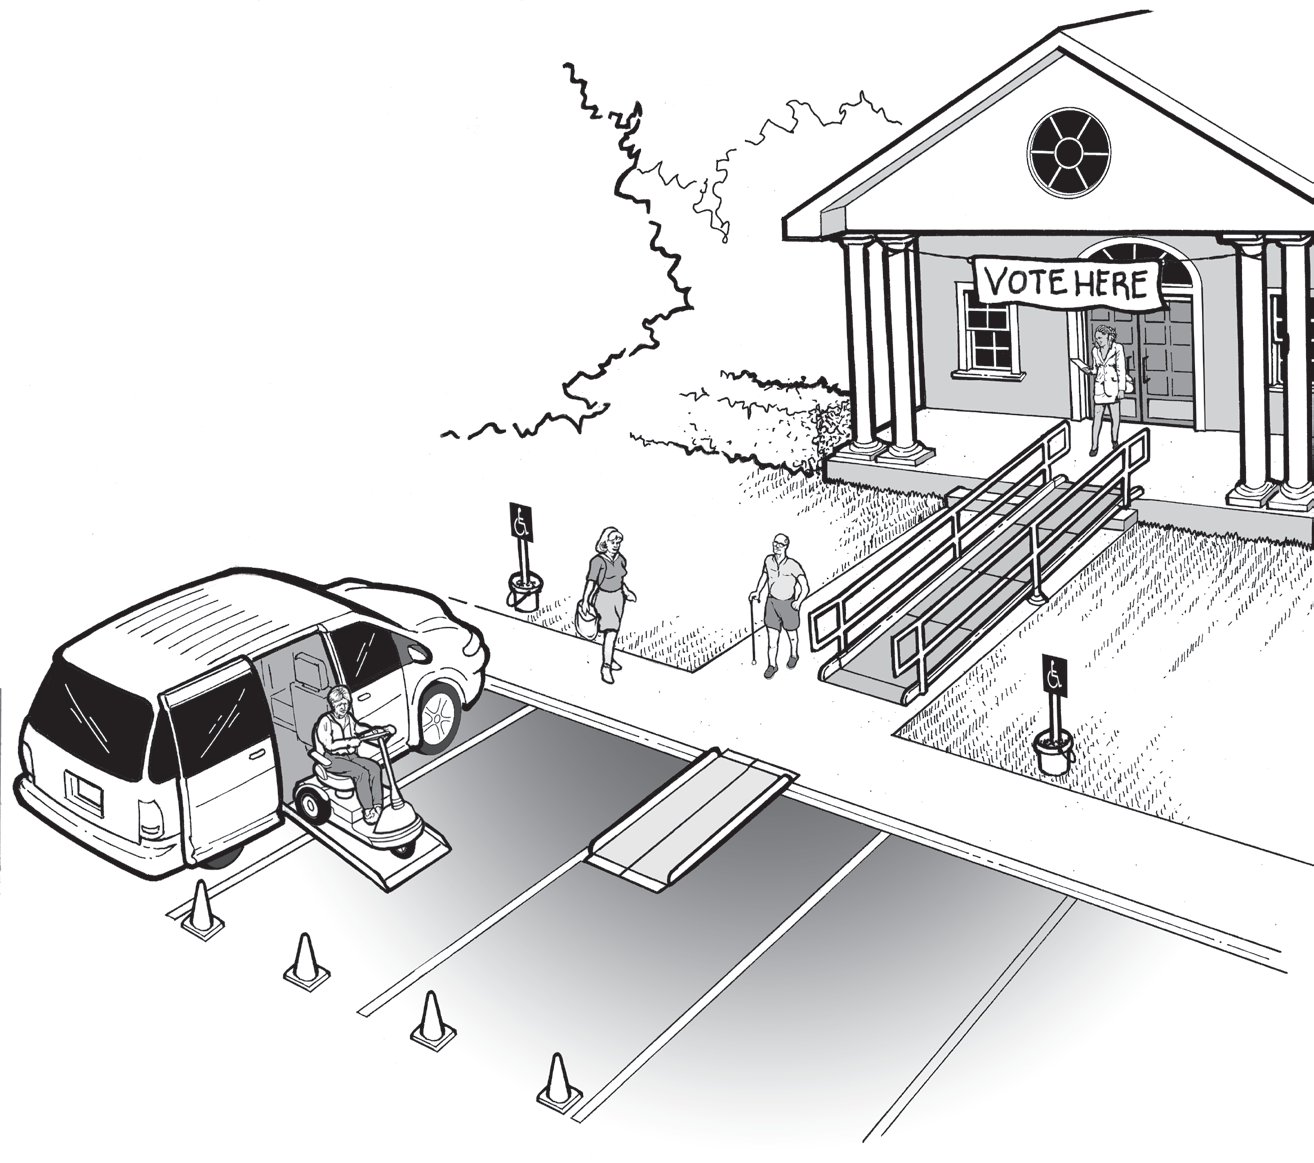 Three standard parking spaces are converted into a van accessible parking space with an access aisle. Cones mark and block off the access aisle and a temporary curb ramp with edge protection connects to an accessible route to the polling place.